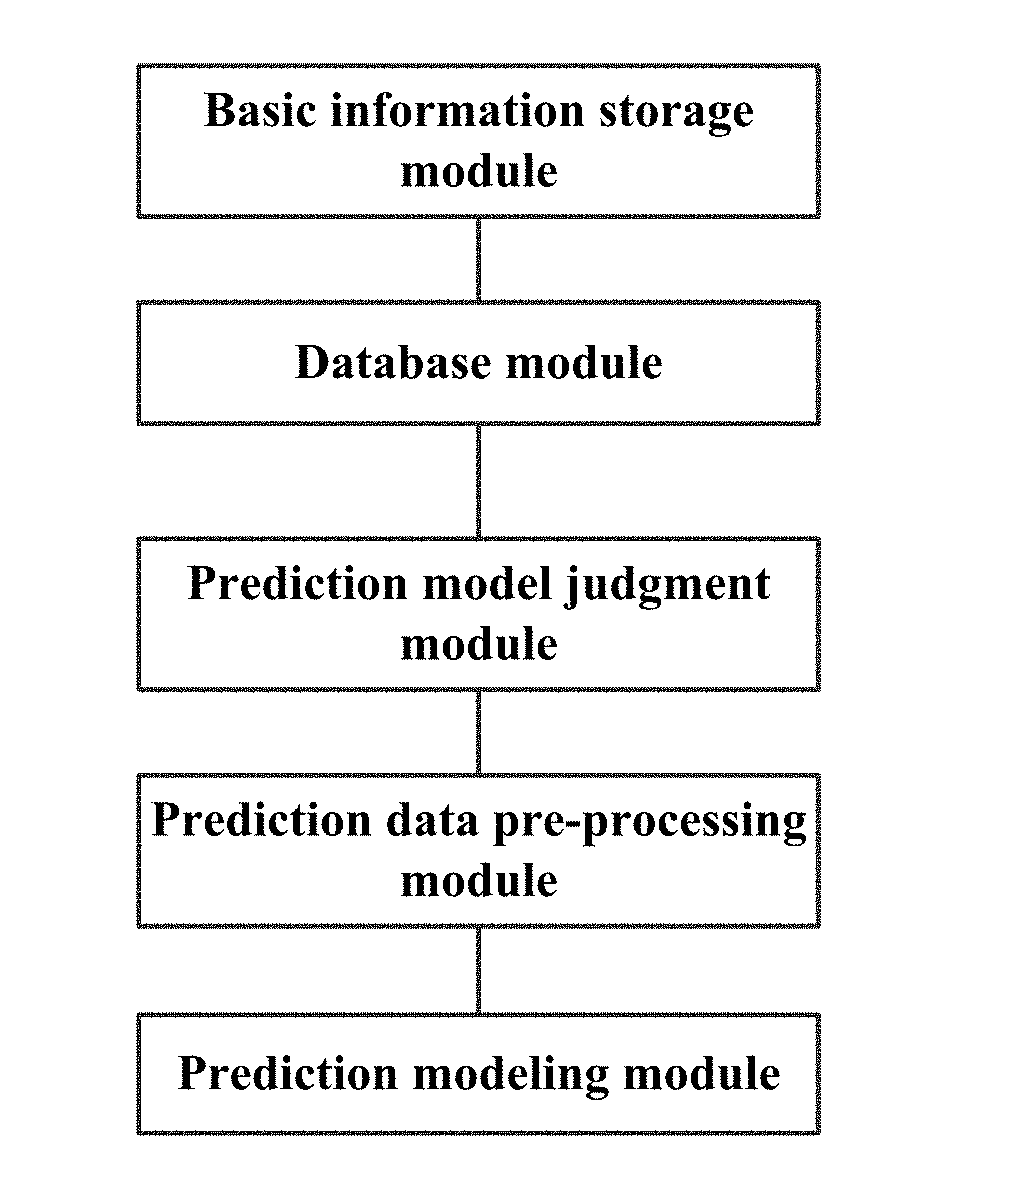 Whole-life-cycle power output classification prediction system for photovoltaic systems